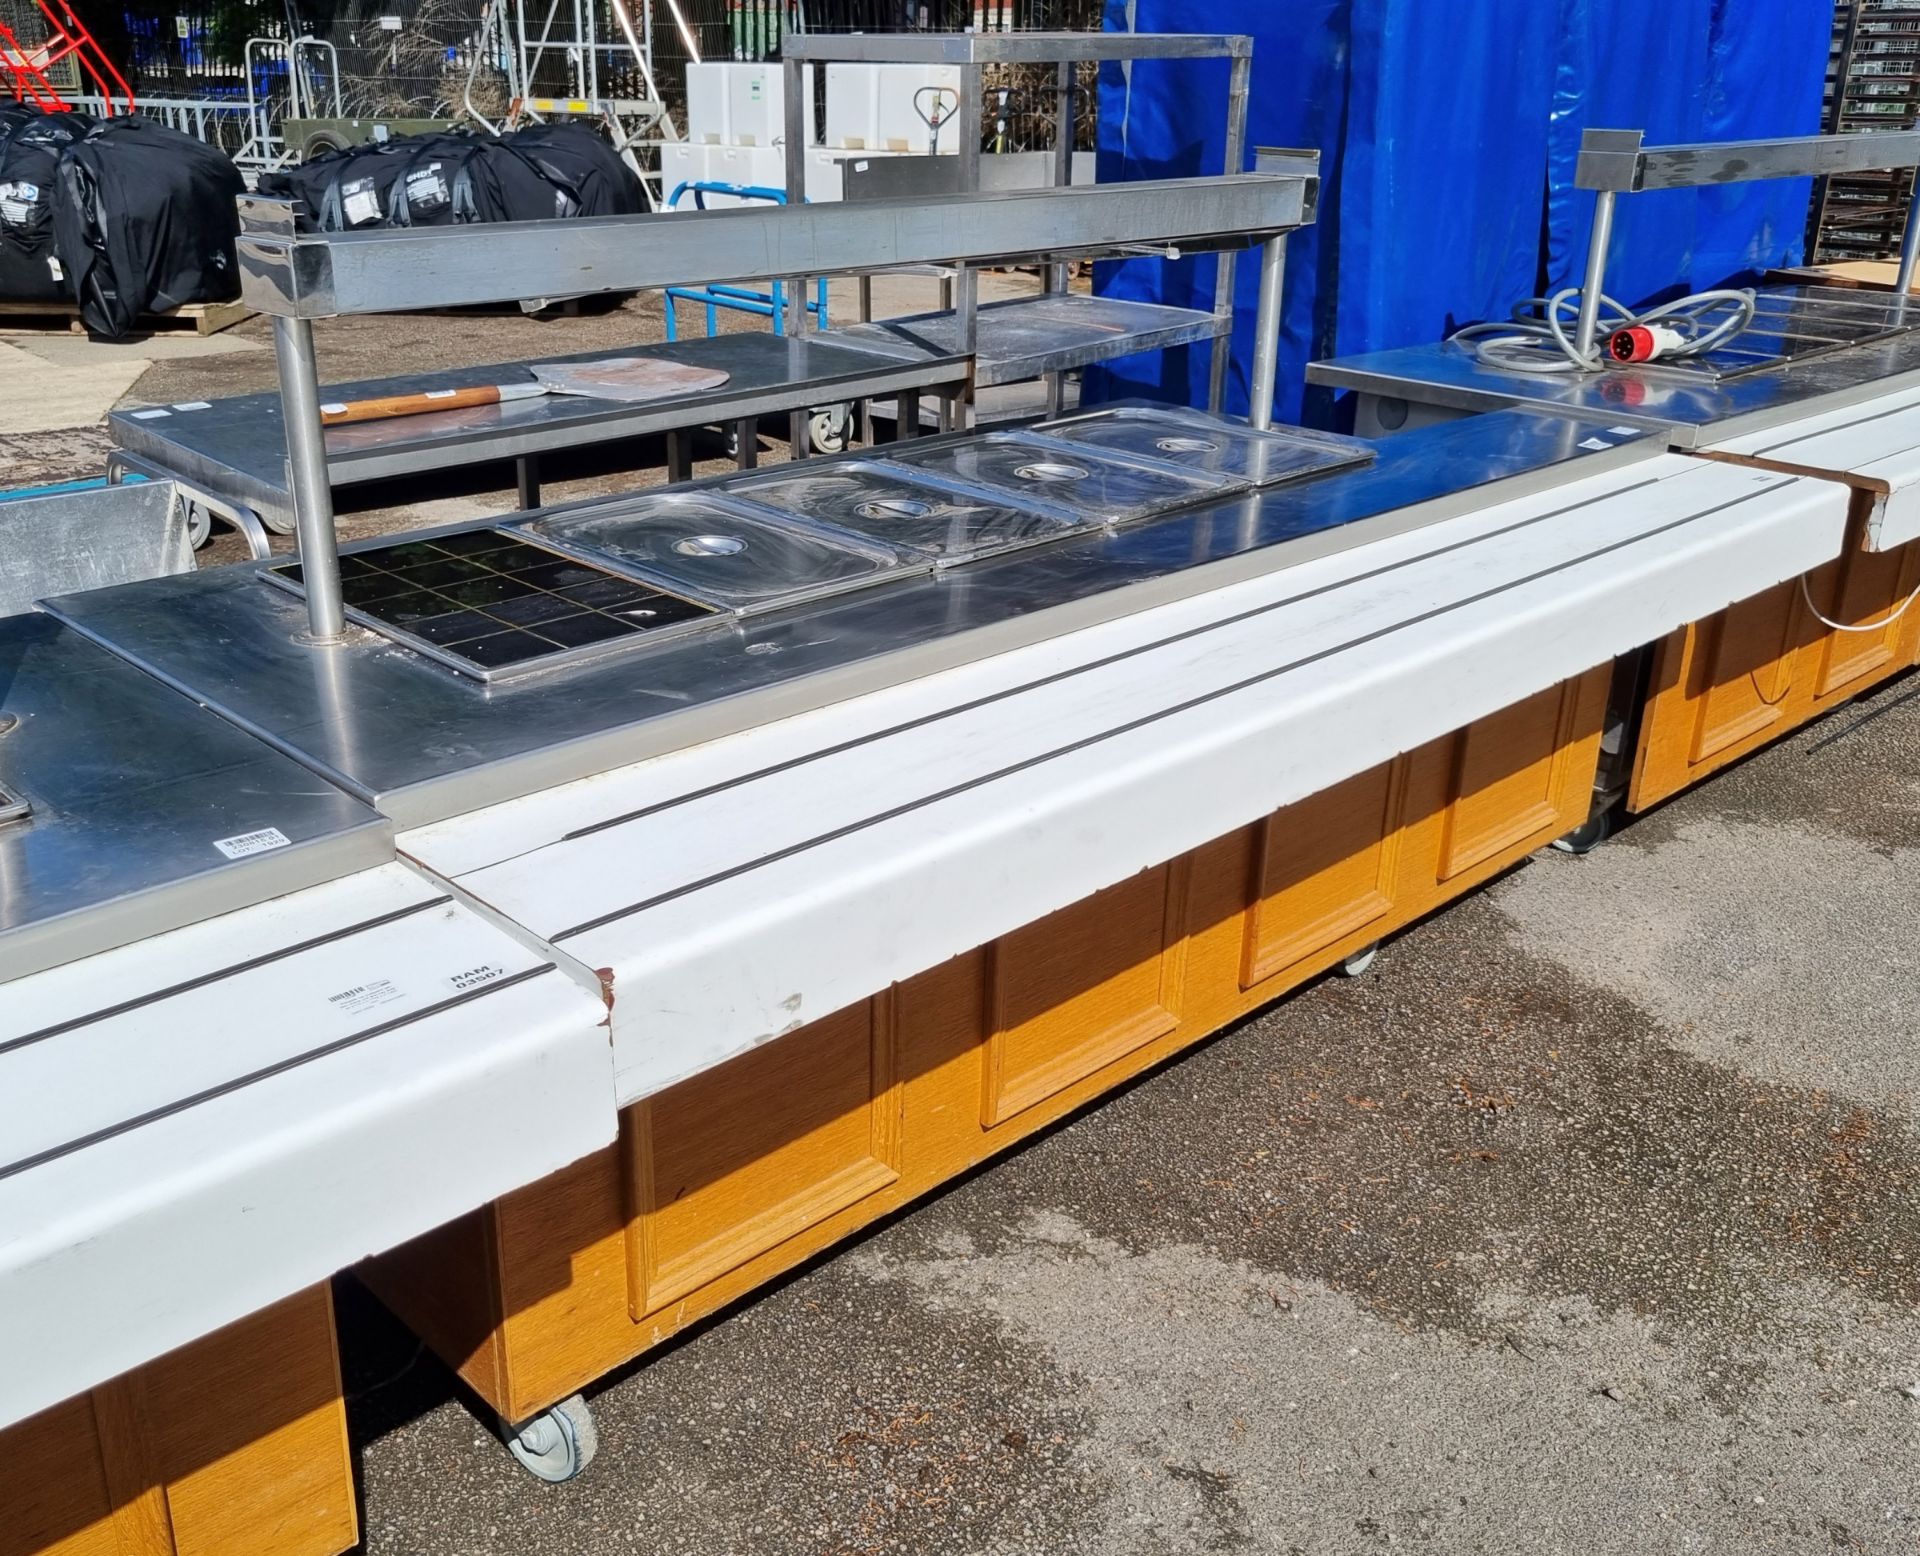 Portable hot cupboard with bain marie unit and tray slide - W 2500 x D 1150 x H 1400 mm - Image 3 of 5